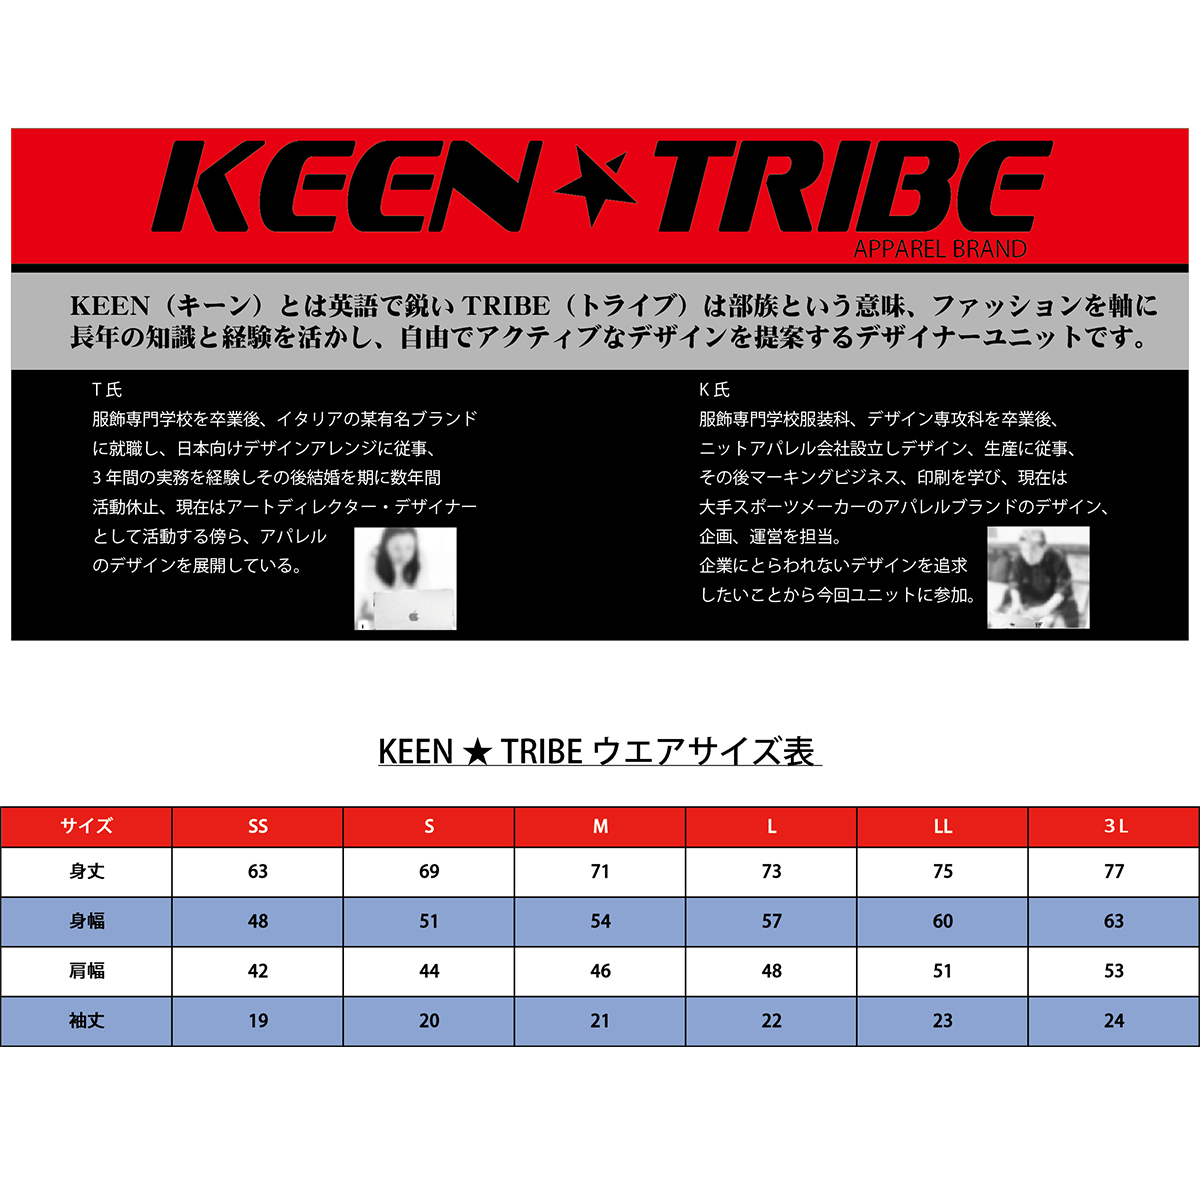 KEEN ★ TRIBE　KT-13(受注生産)